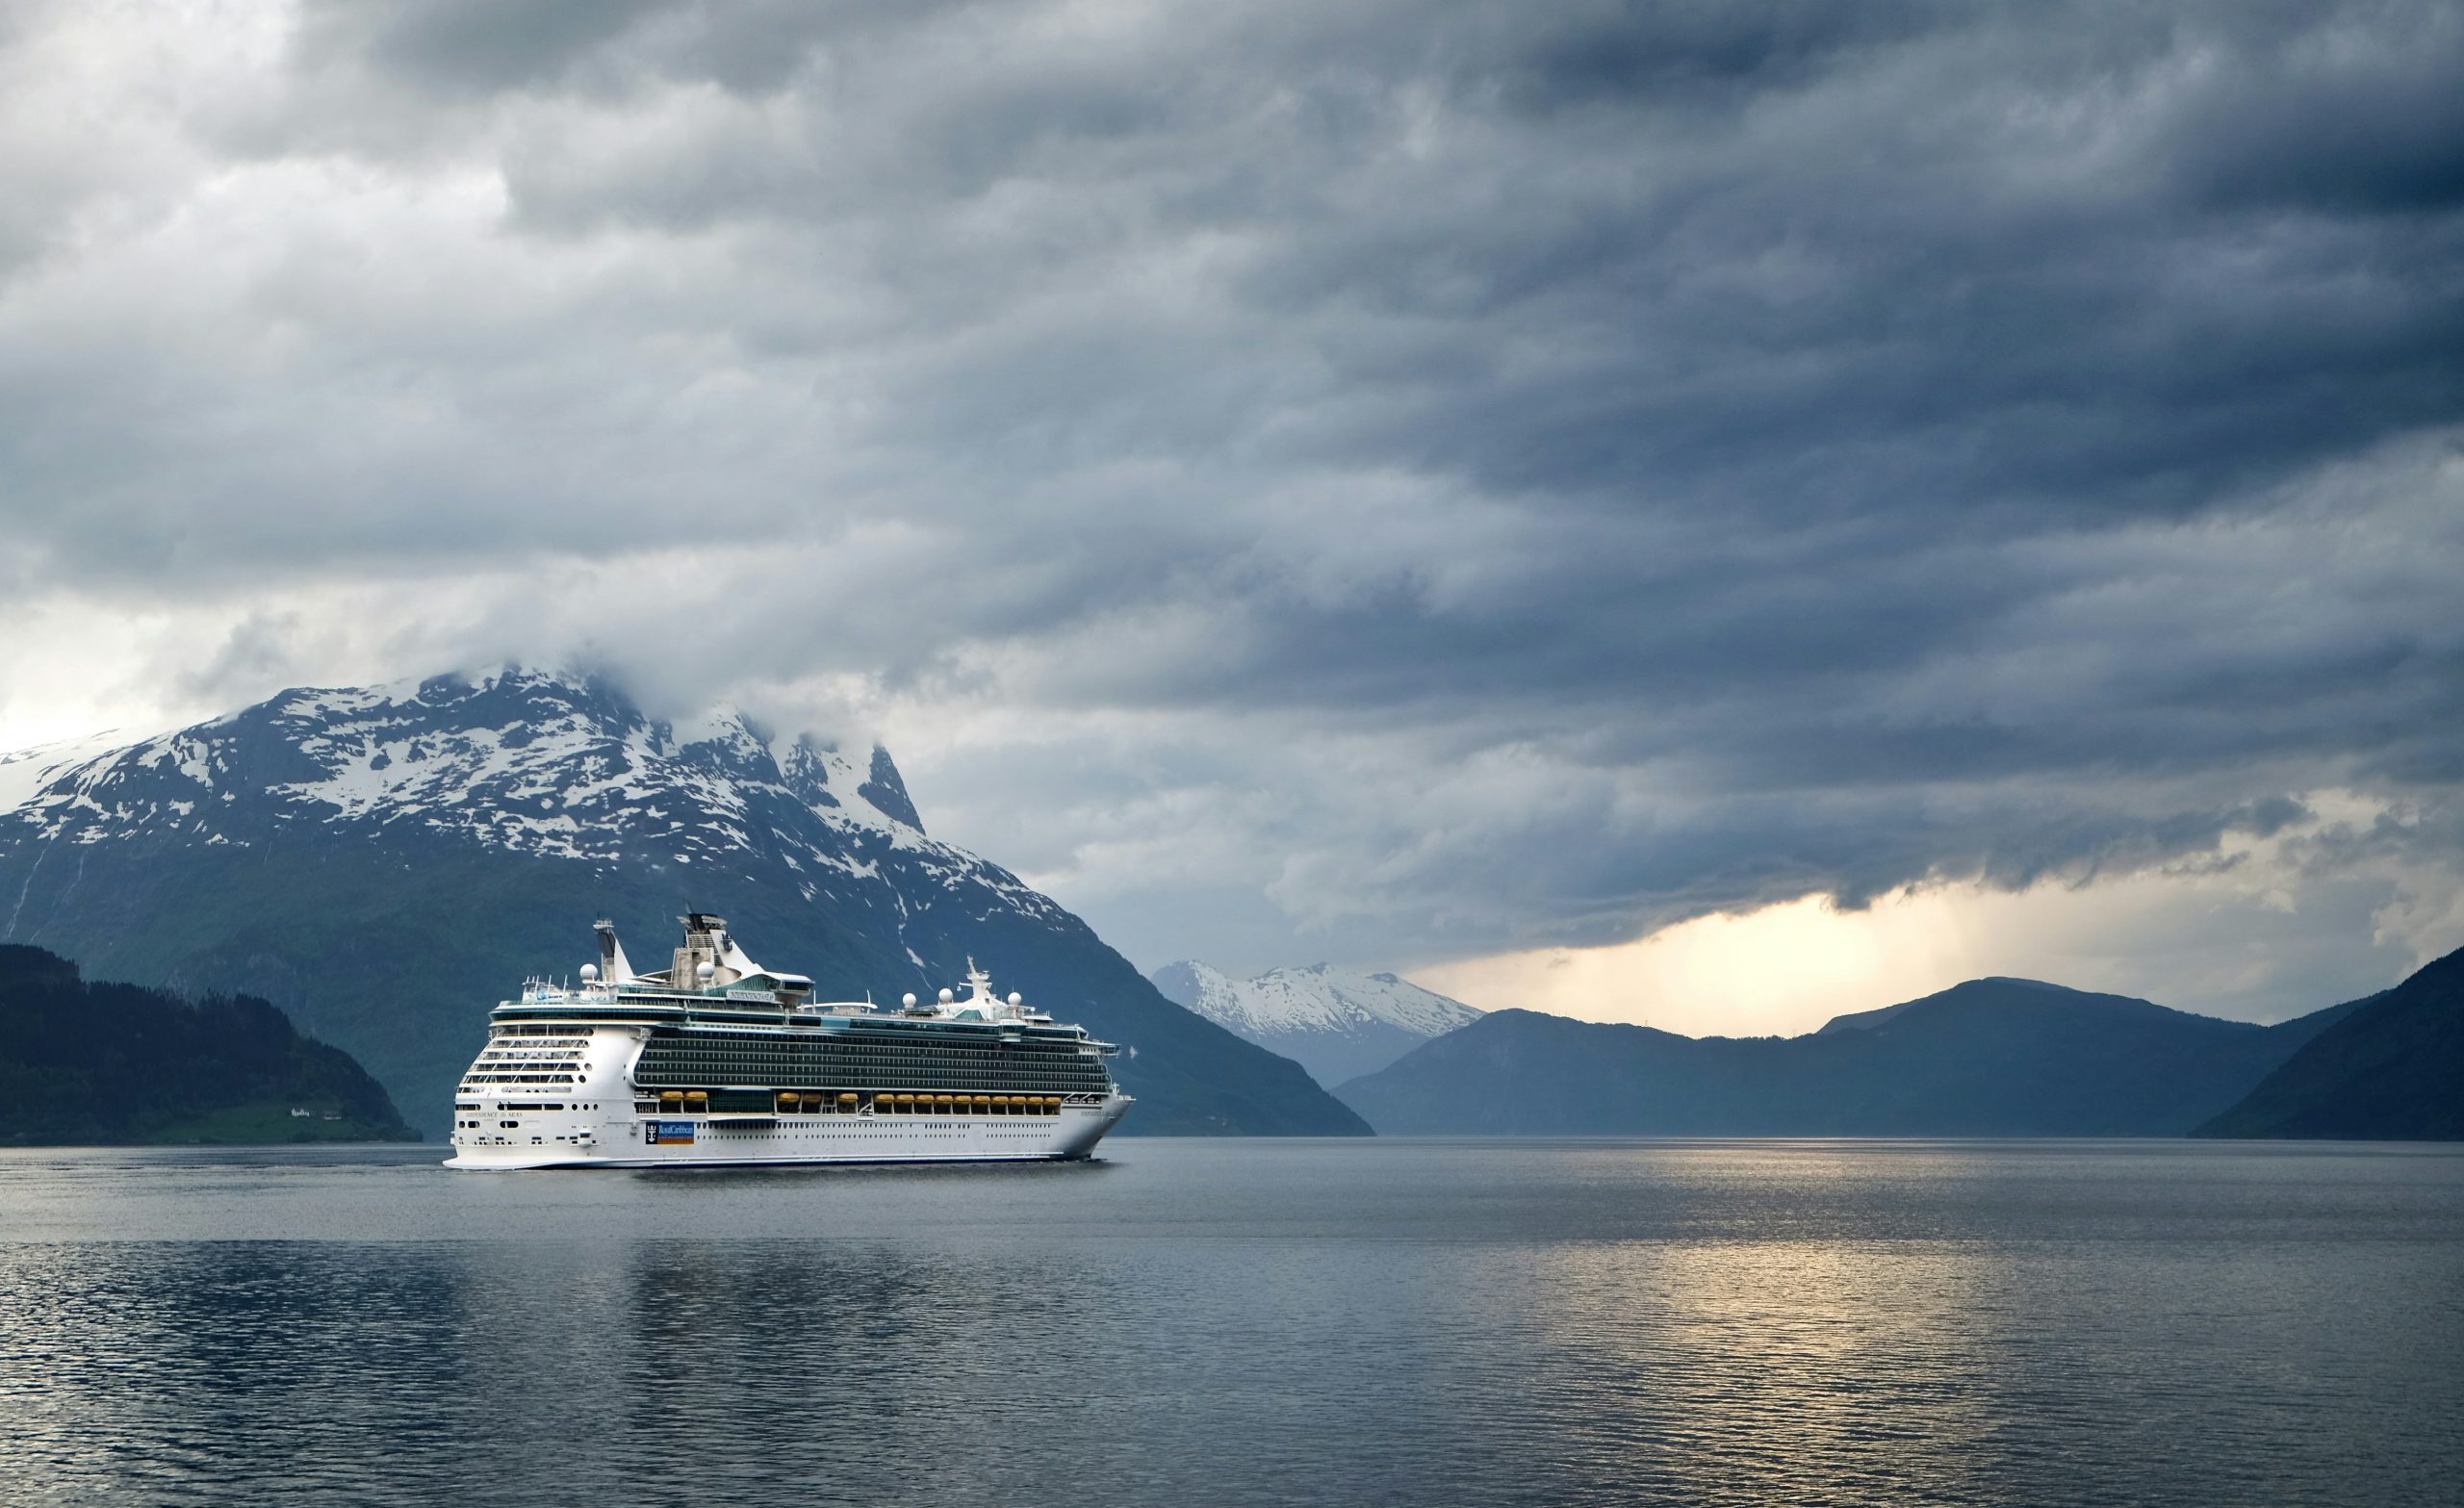 discover breathtaking fjord cruises and explore stunning natural landscapes in norway. plan your next adventure to experience the beauty of fjords firsthand.